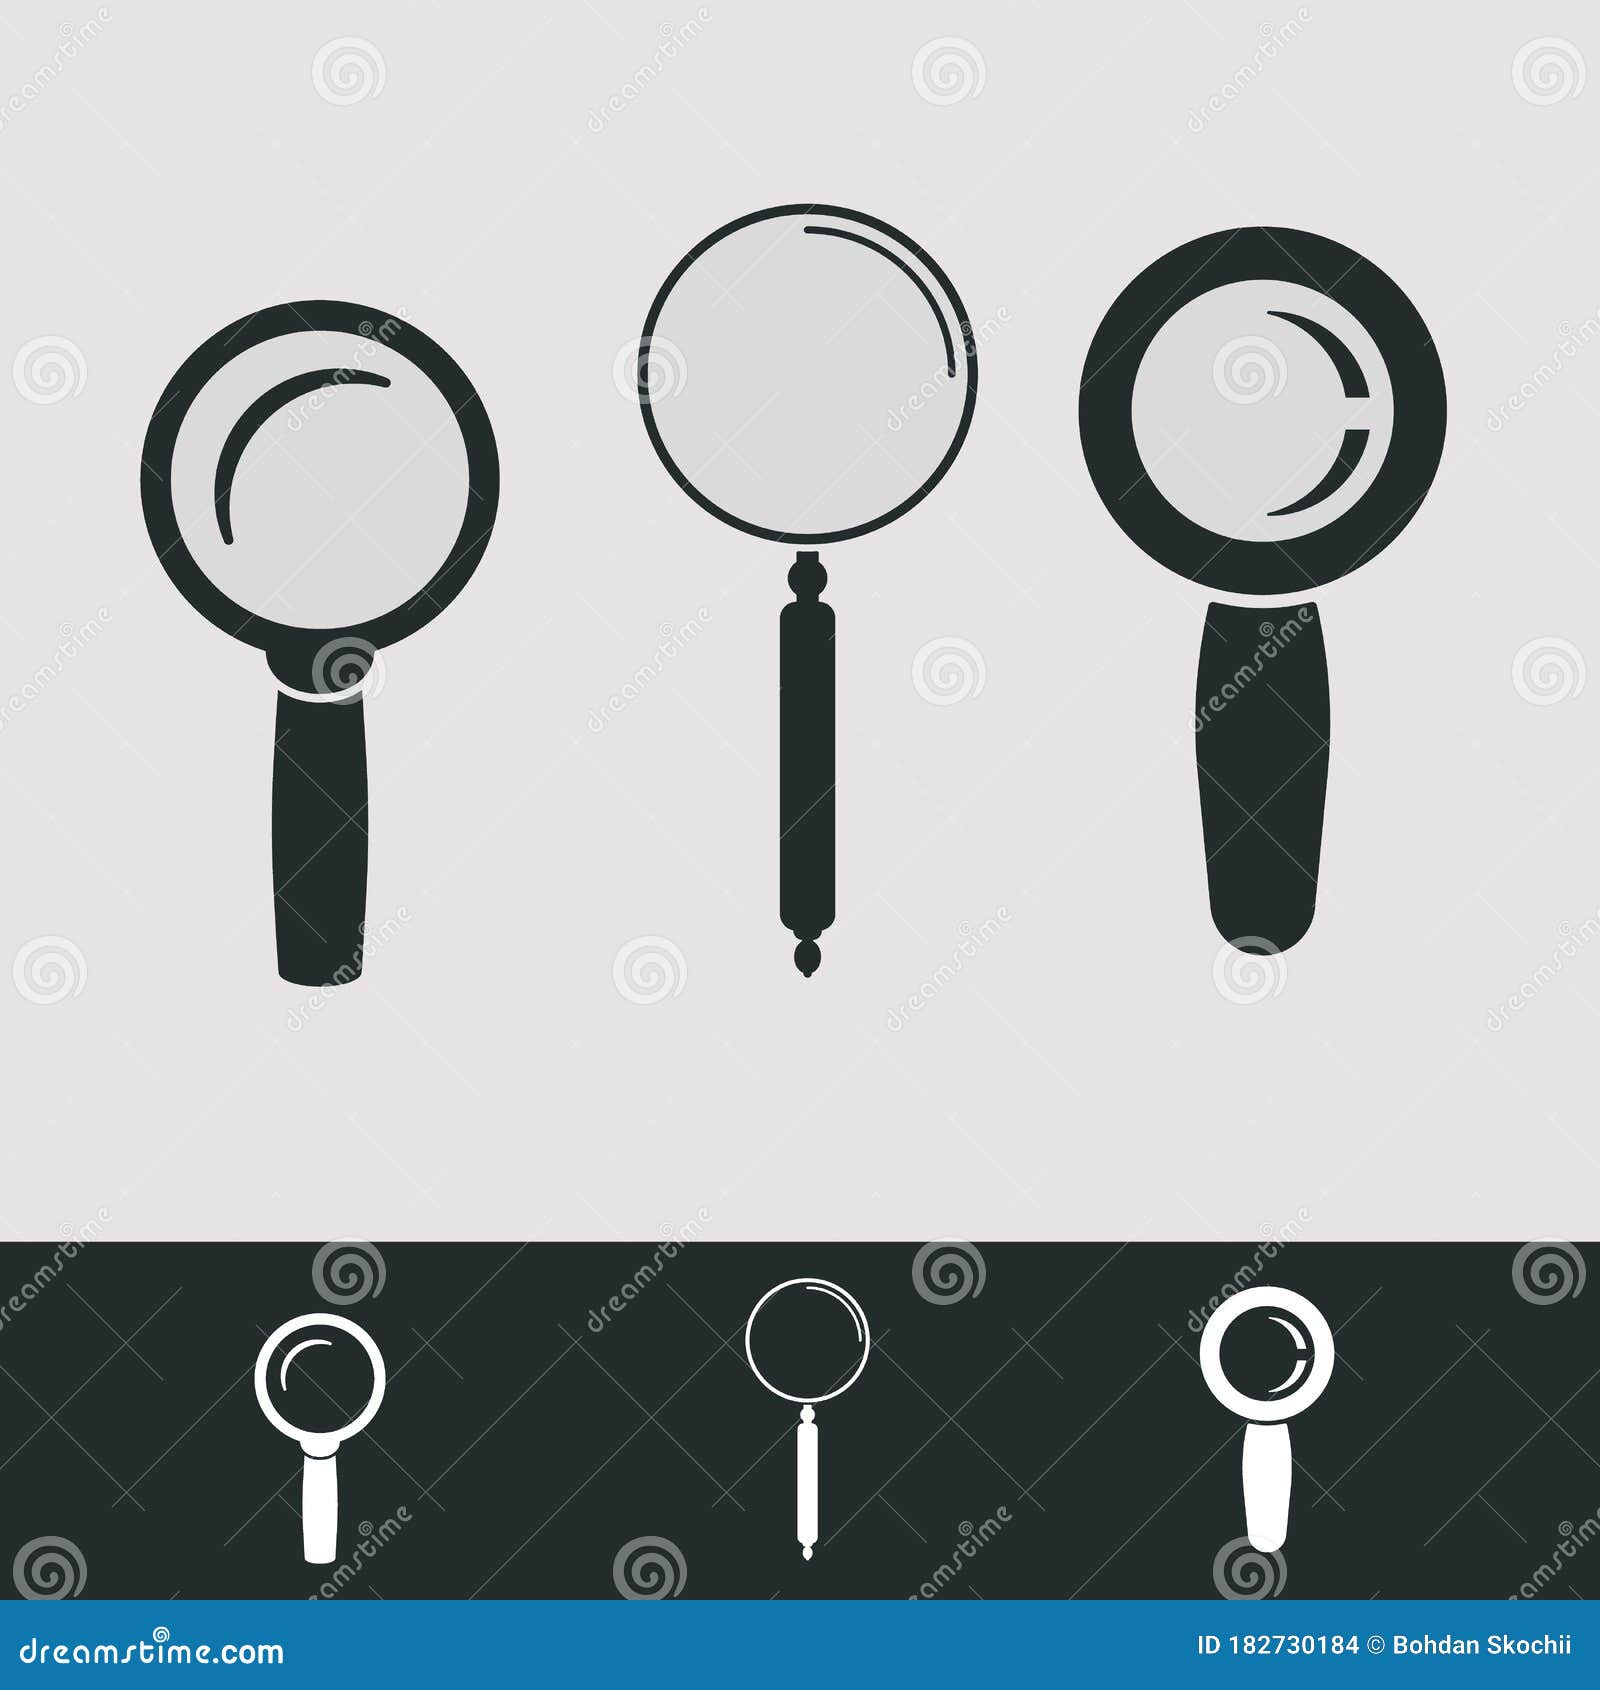 Set of Three Kinds of Magnifying Glass Stock Vector - Illustration of ...